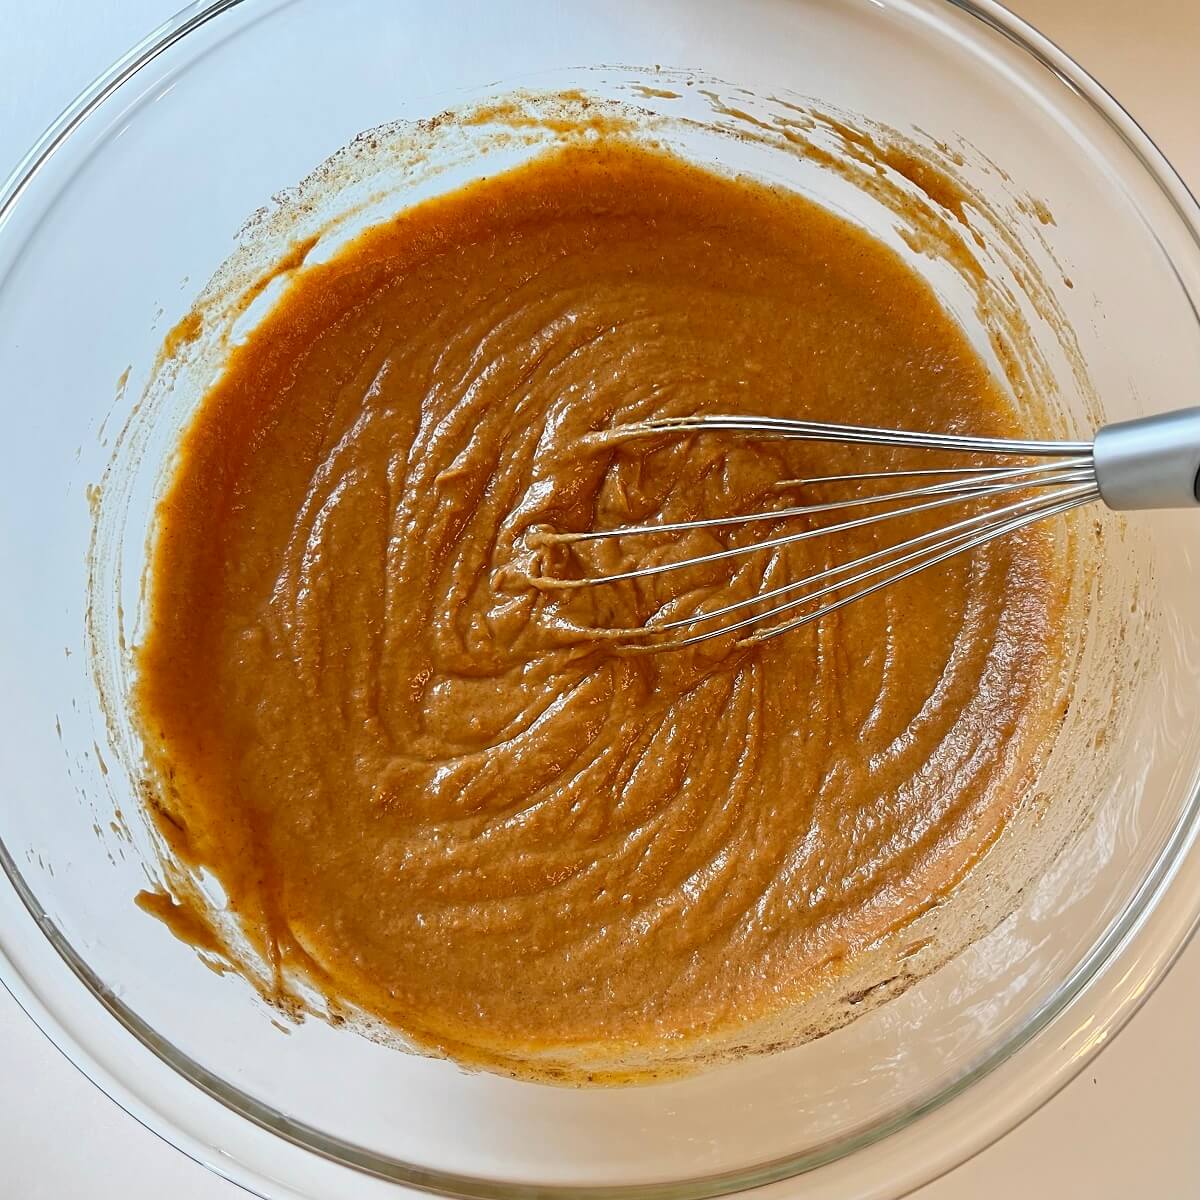 Wet ingredients for pumpkin bread in a glass mixing bowl.